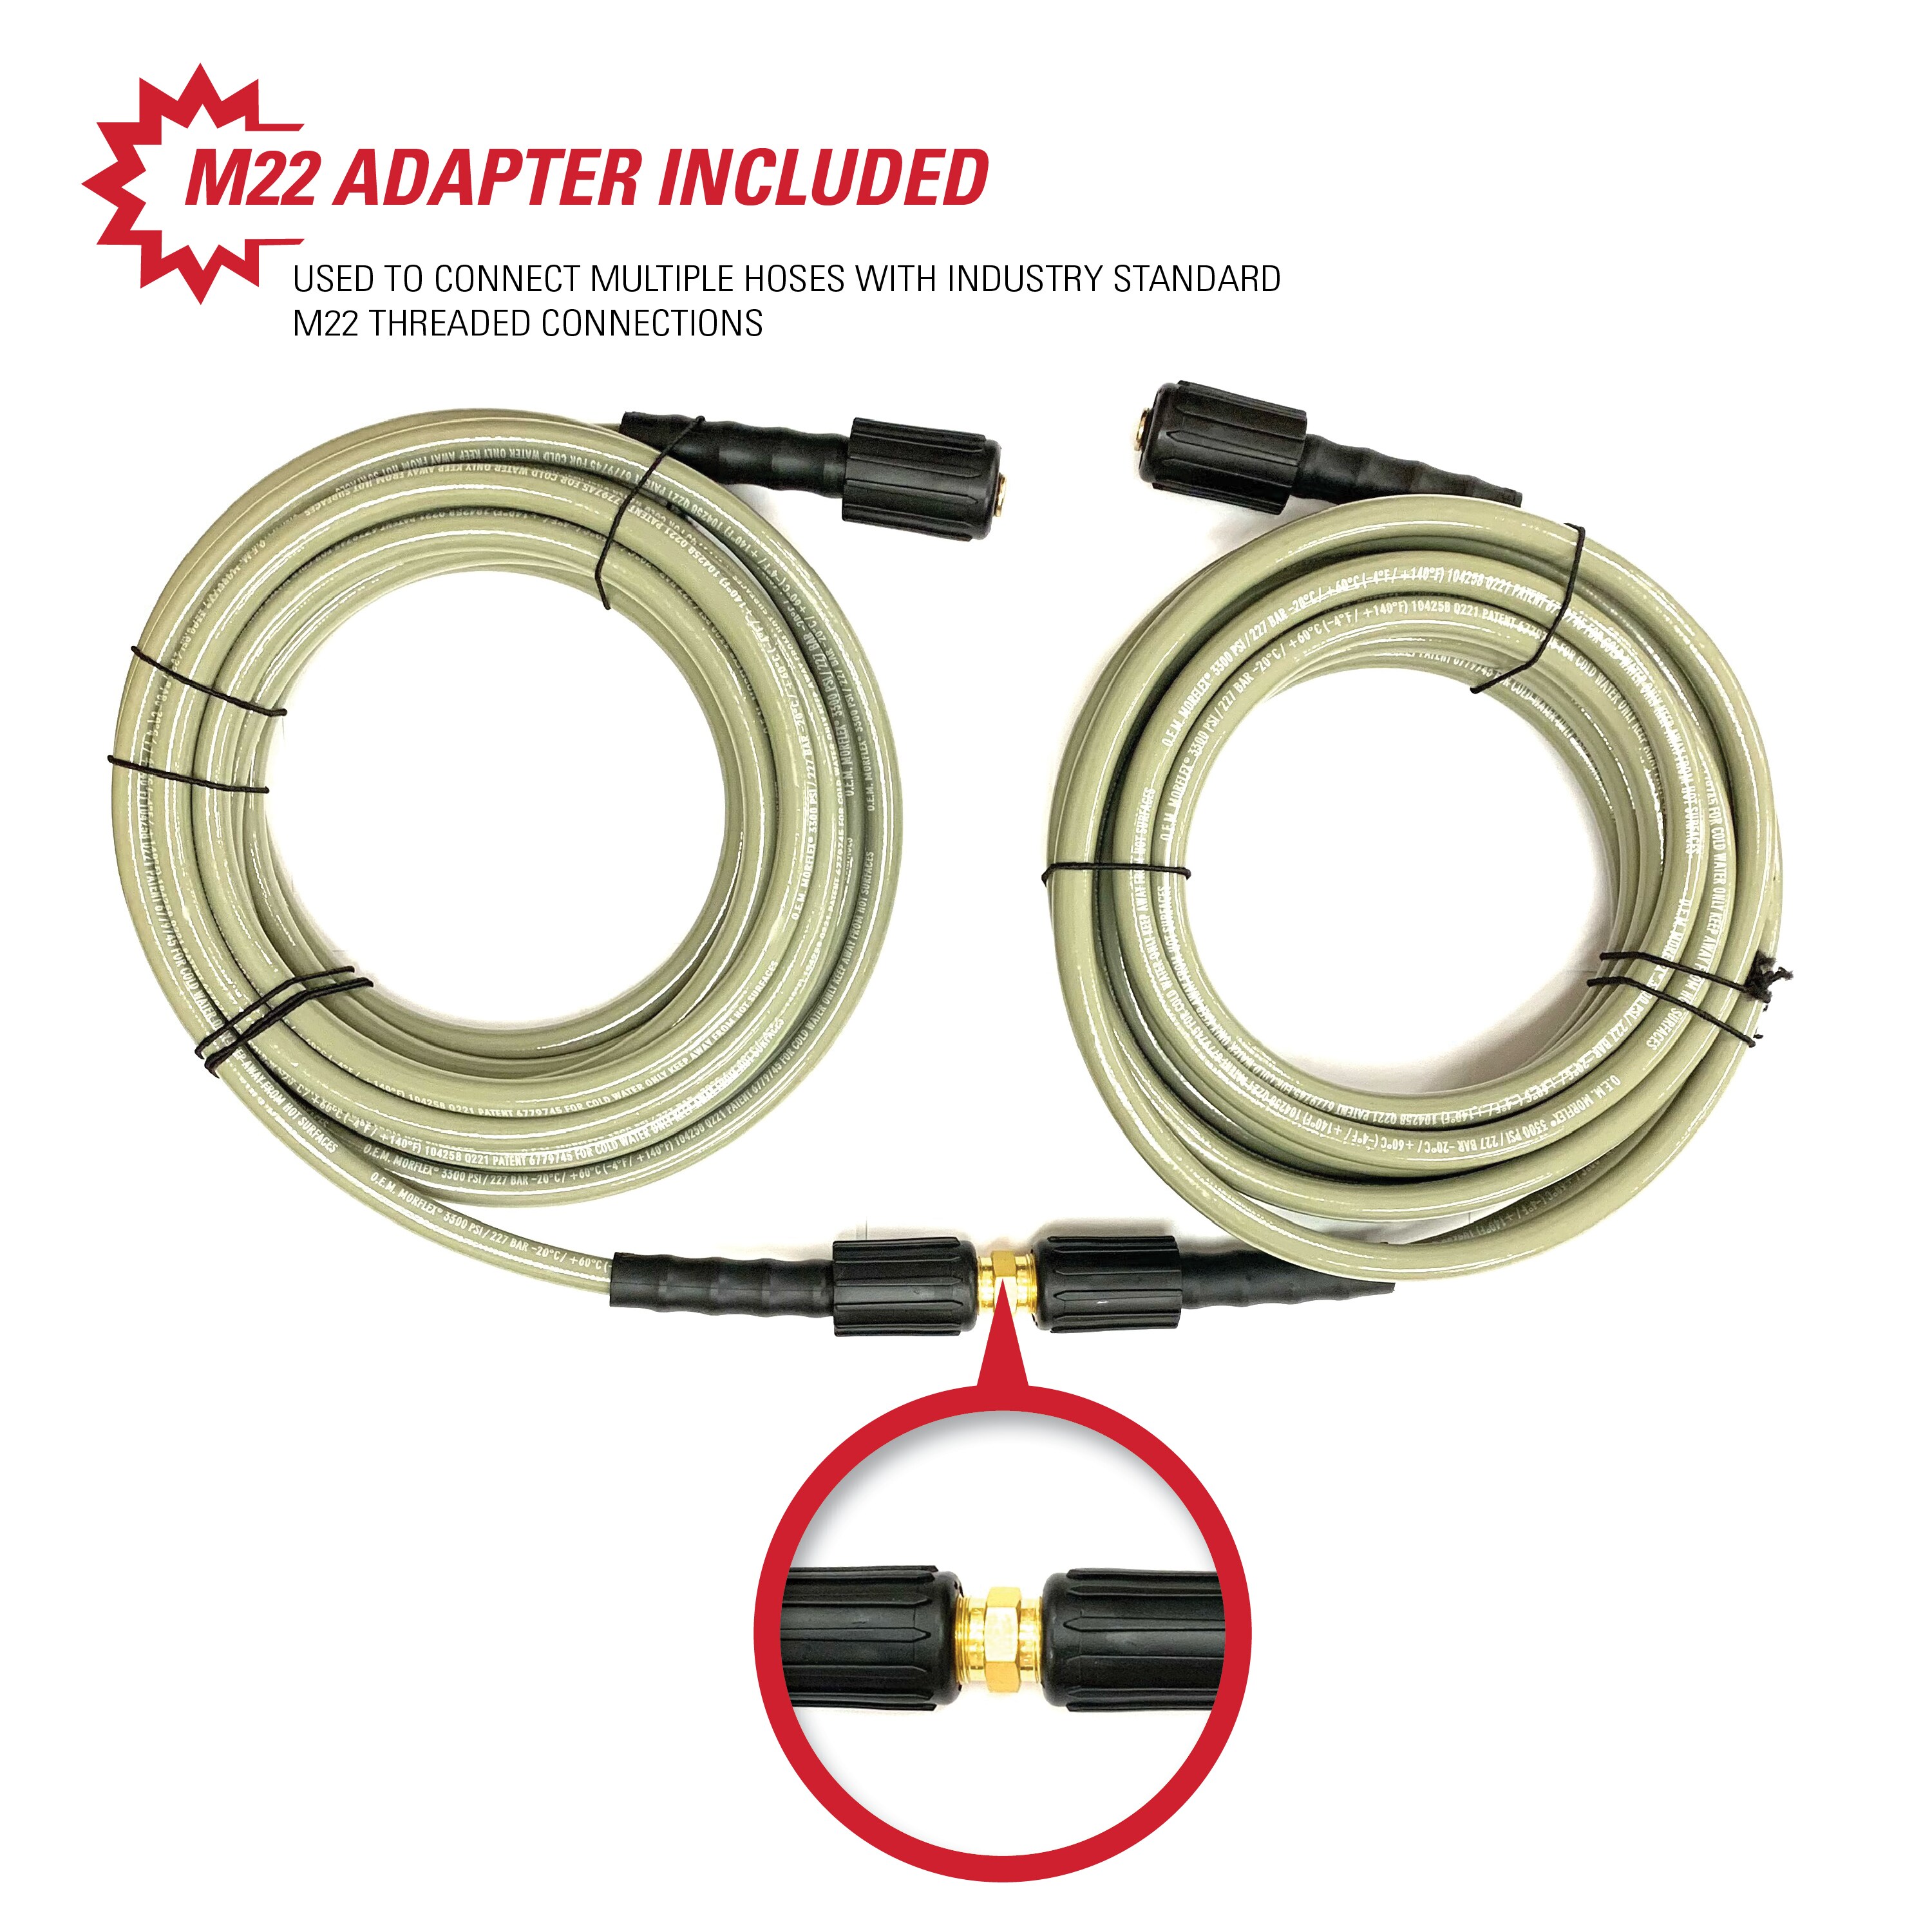 Pressure Washer Hoses & Connections Explained 